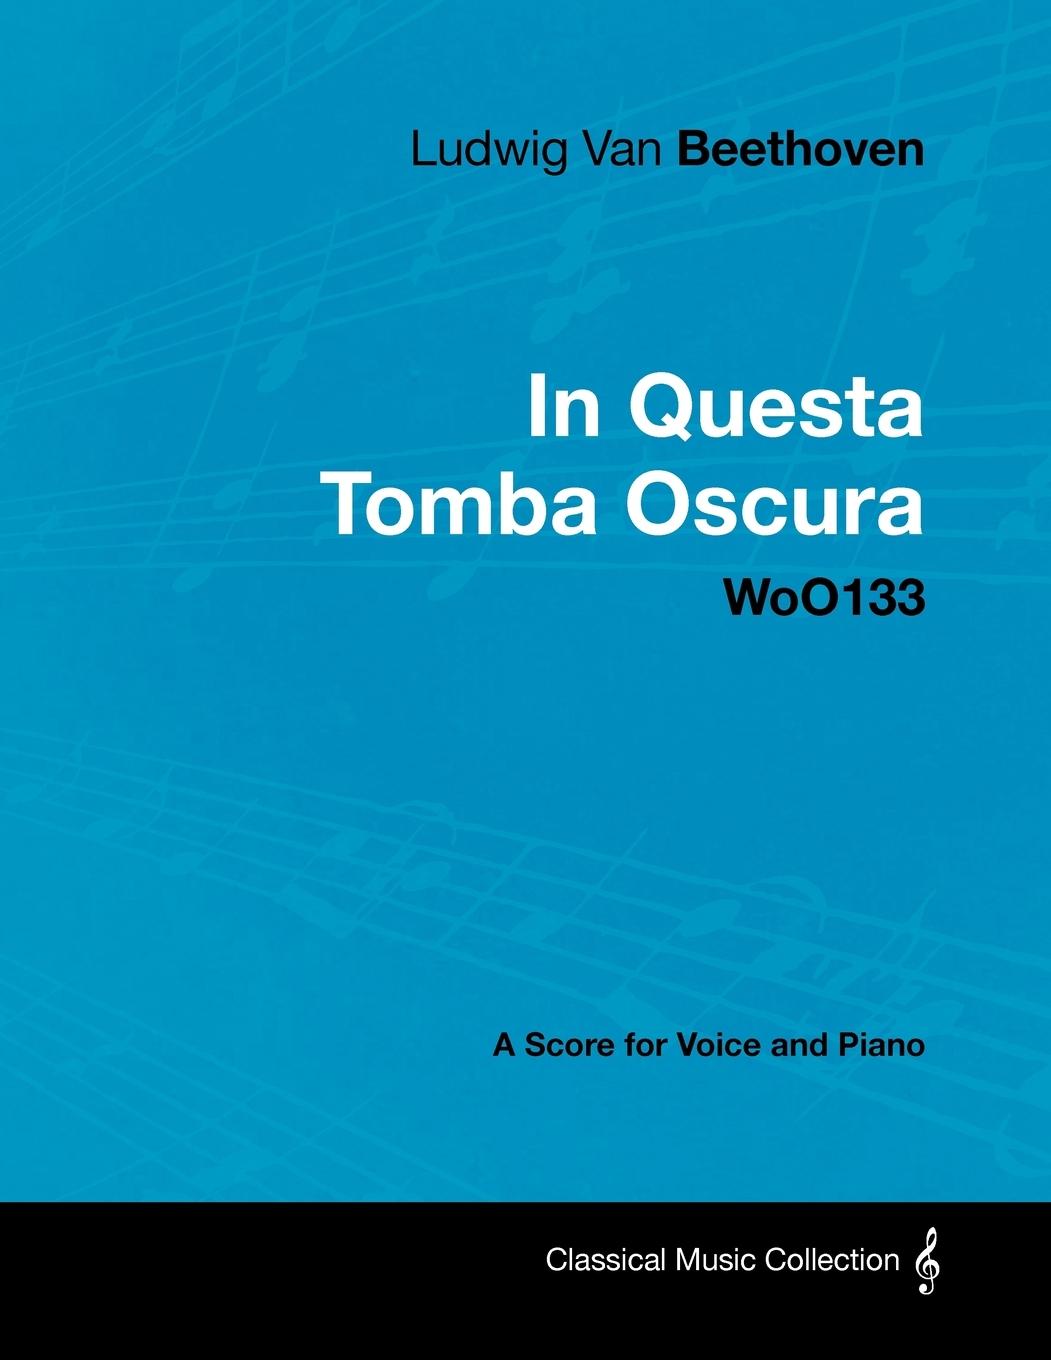 Ludwig Van Beethoven - In Questa Tomba Oscura - WoO 133 - A Score for Voice and Piano: With a Biography by Joseph Otten / Ludwig van Beethoven / Taschenbuch / Englisch / 2012 / MASTERSON PR - Beethoven, Ludwig van